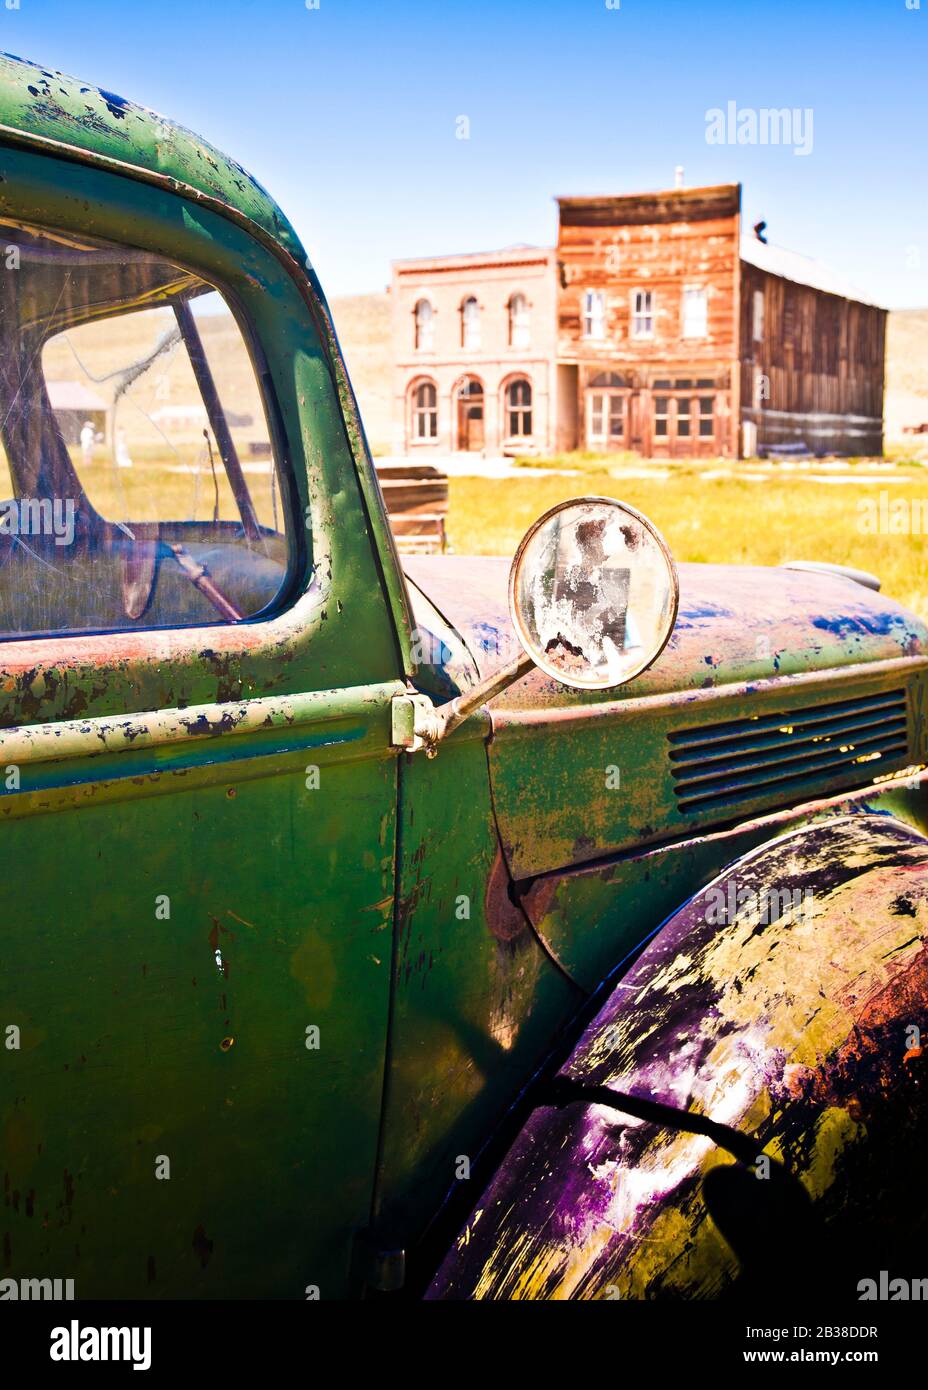 green pickup truck 1930s  with rusty flaking paintwork Stock Photo